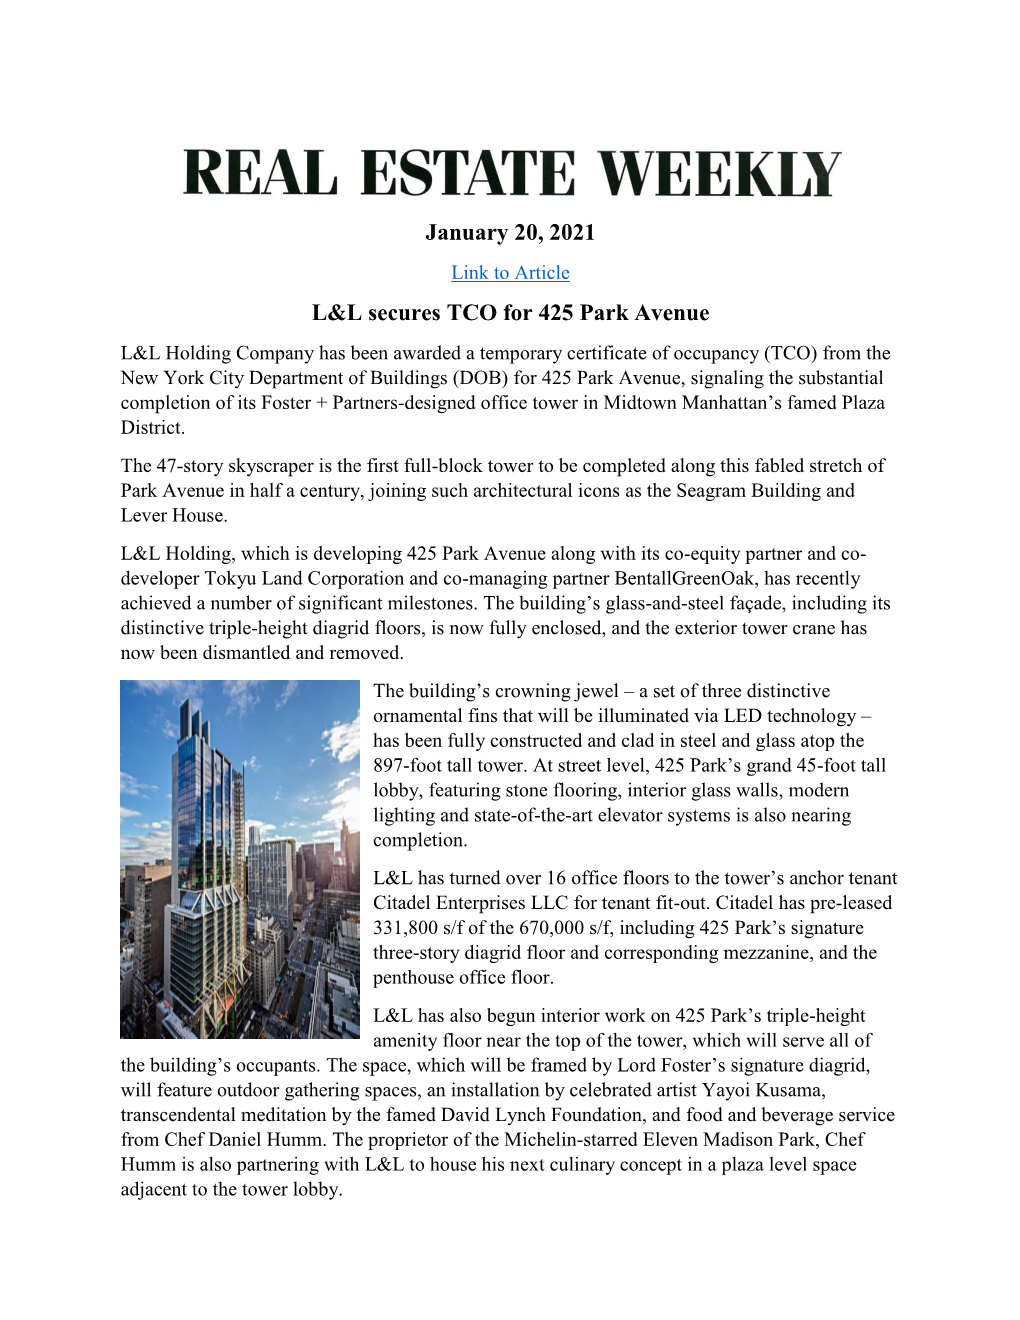 Real Estate Weekly January 20, 2021 L&L Secures